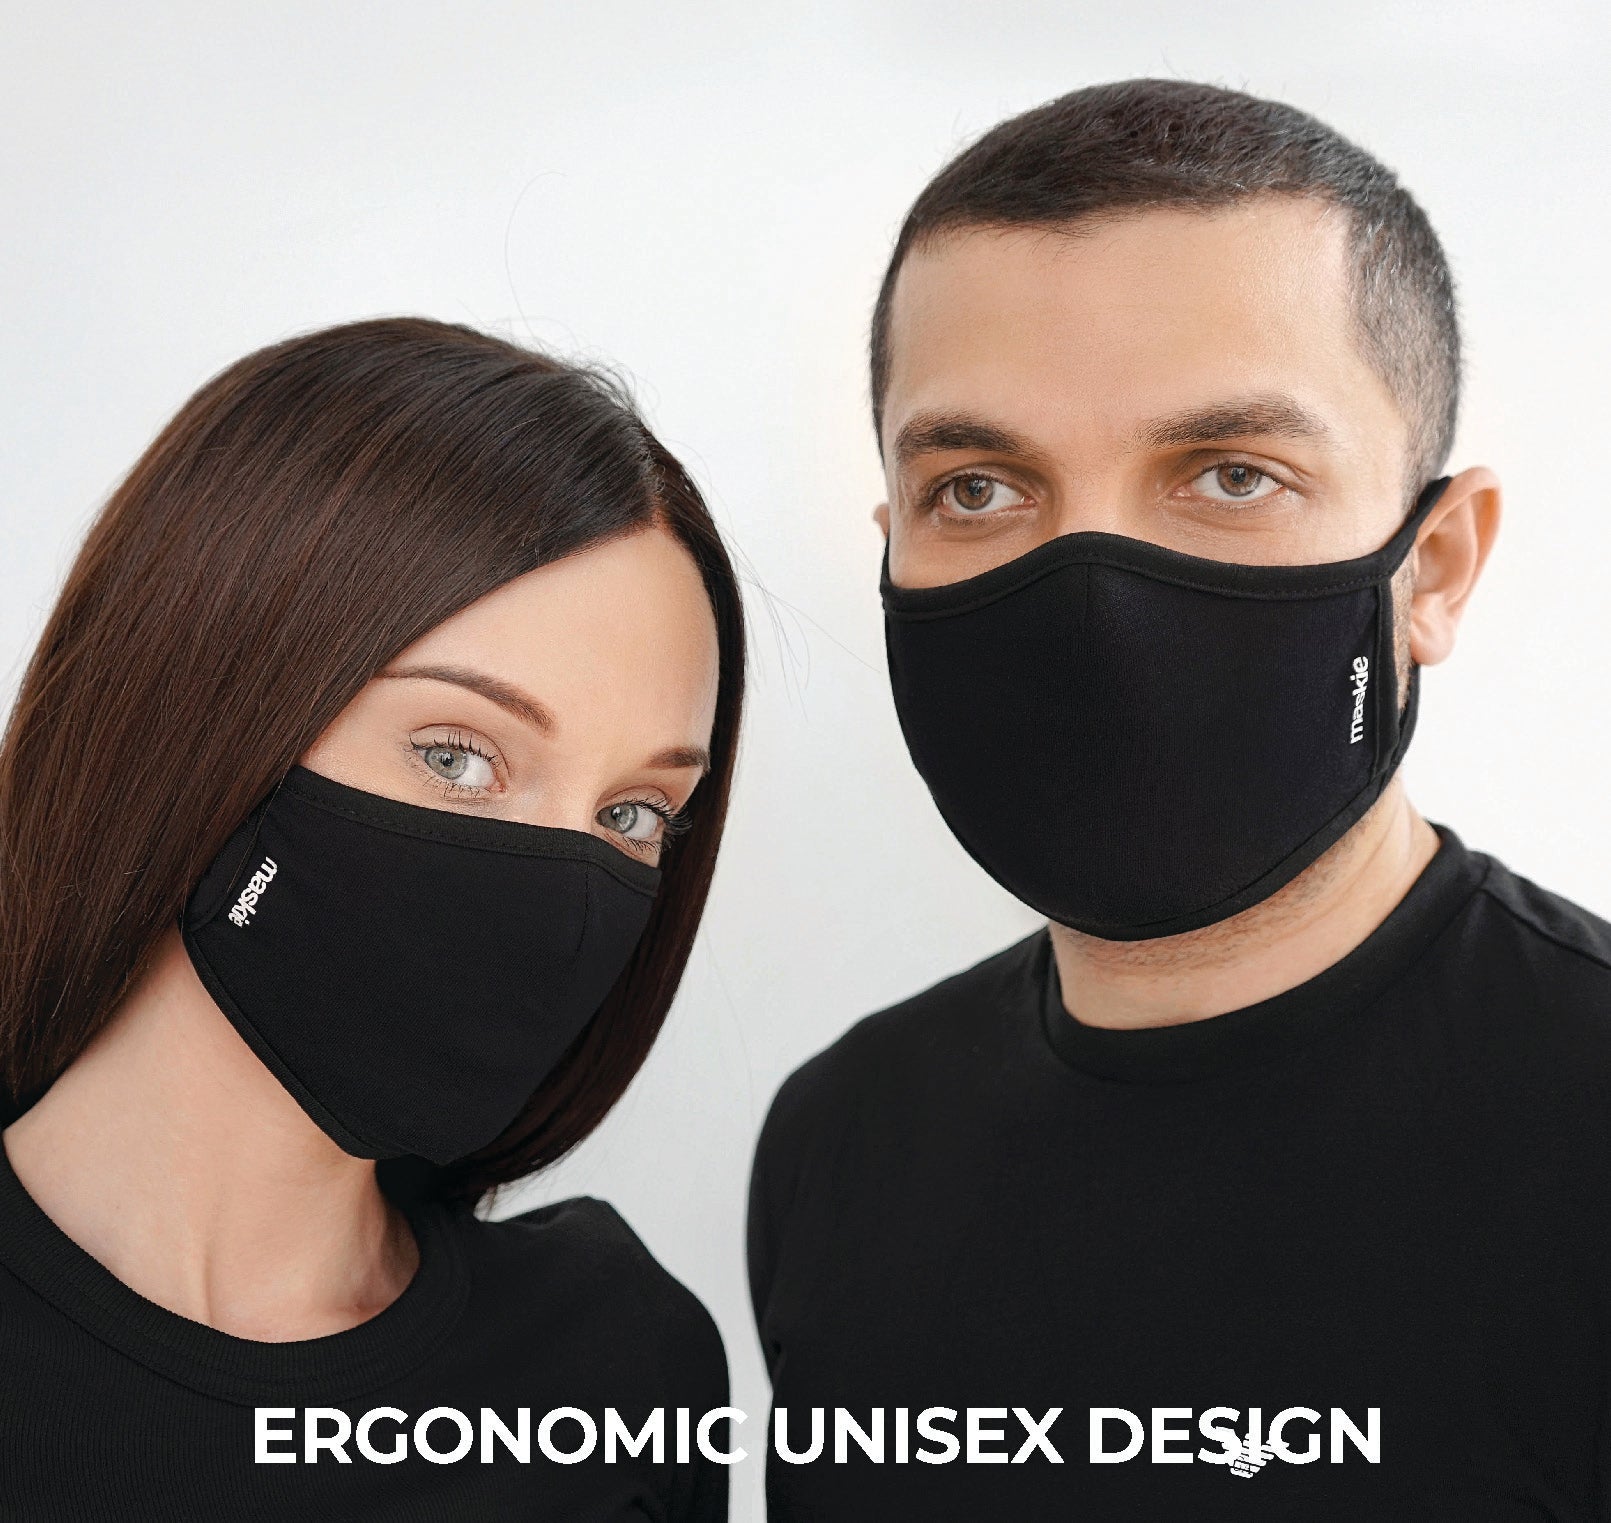 Cotton Washable Face Mask (Black) - Maskie ‘Plus’ Reusable Breathable Cloth Face Covering with Adjustable Ear Loops - Comfortable Masks for Men and Women